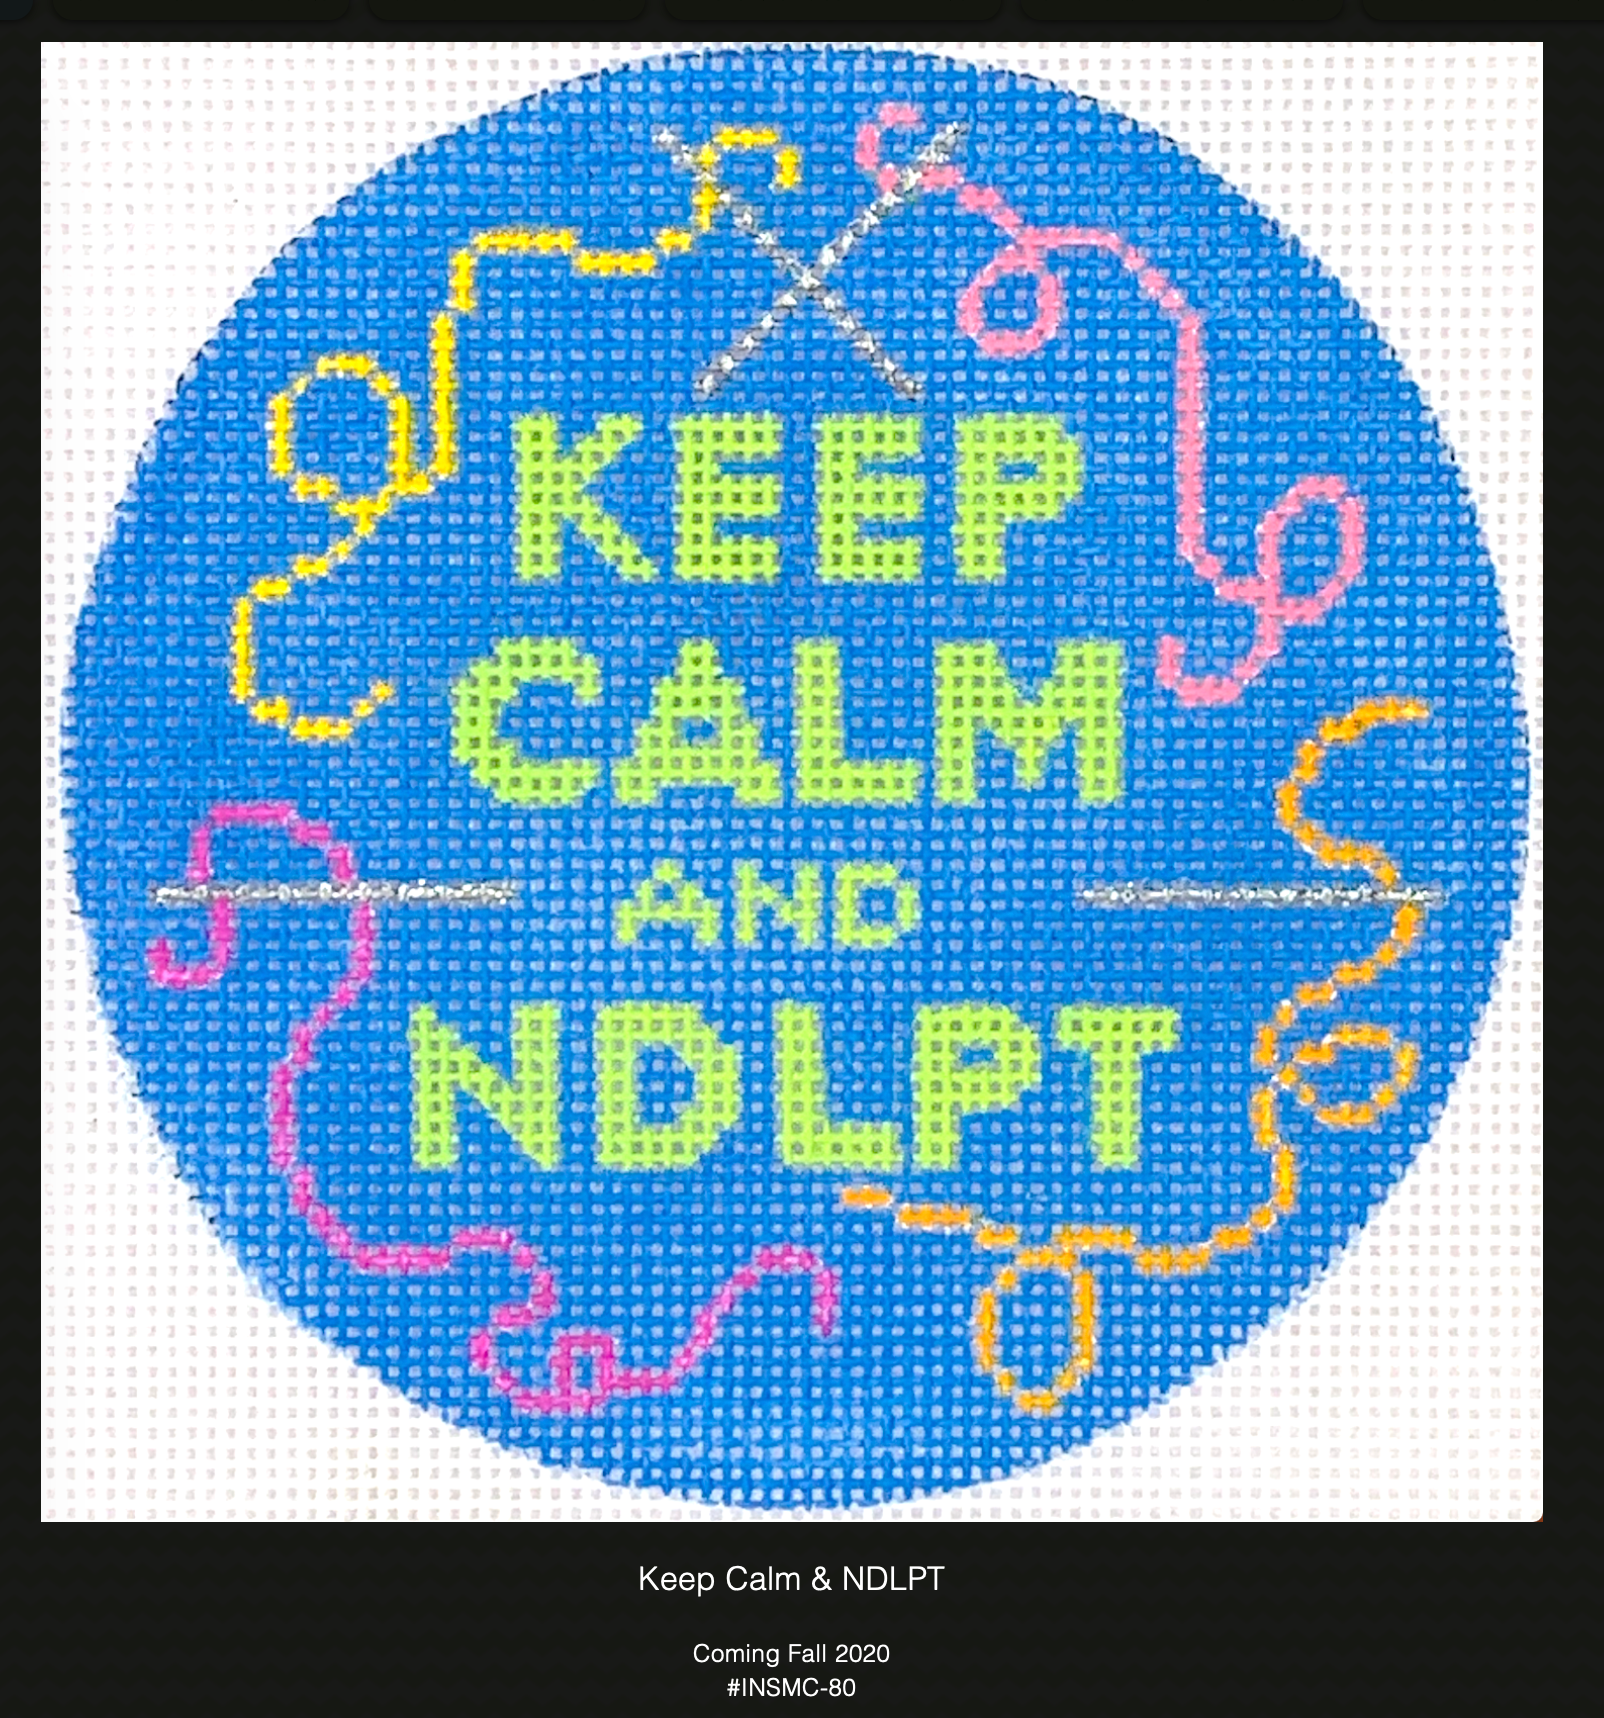 Kate Dickerson INSMC-80 Keep Calm and NDLPT